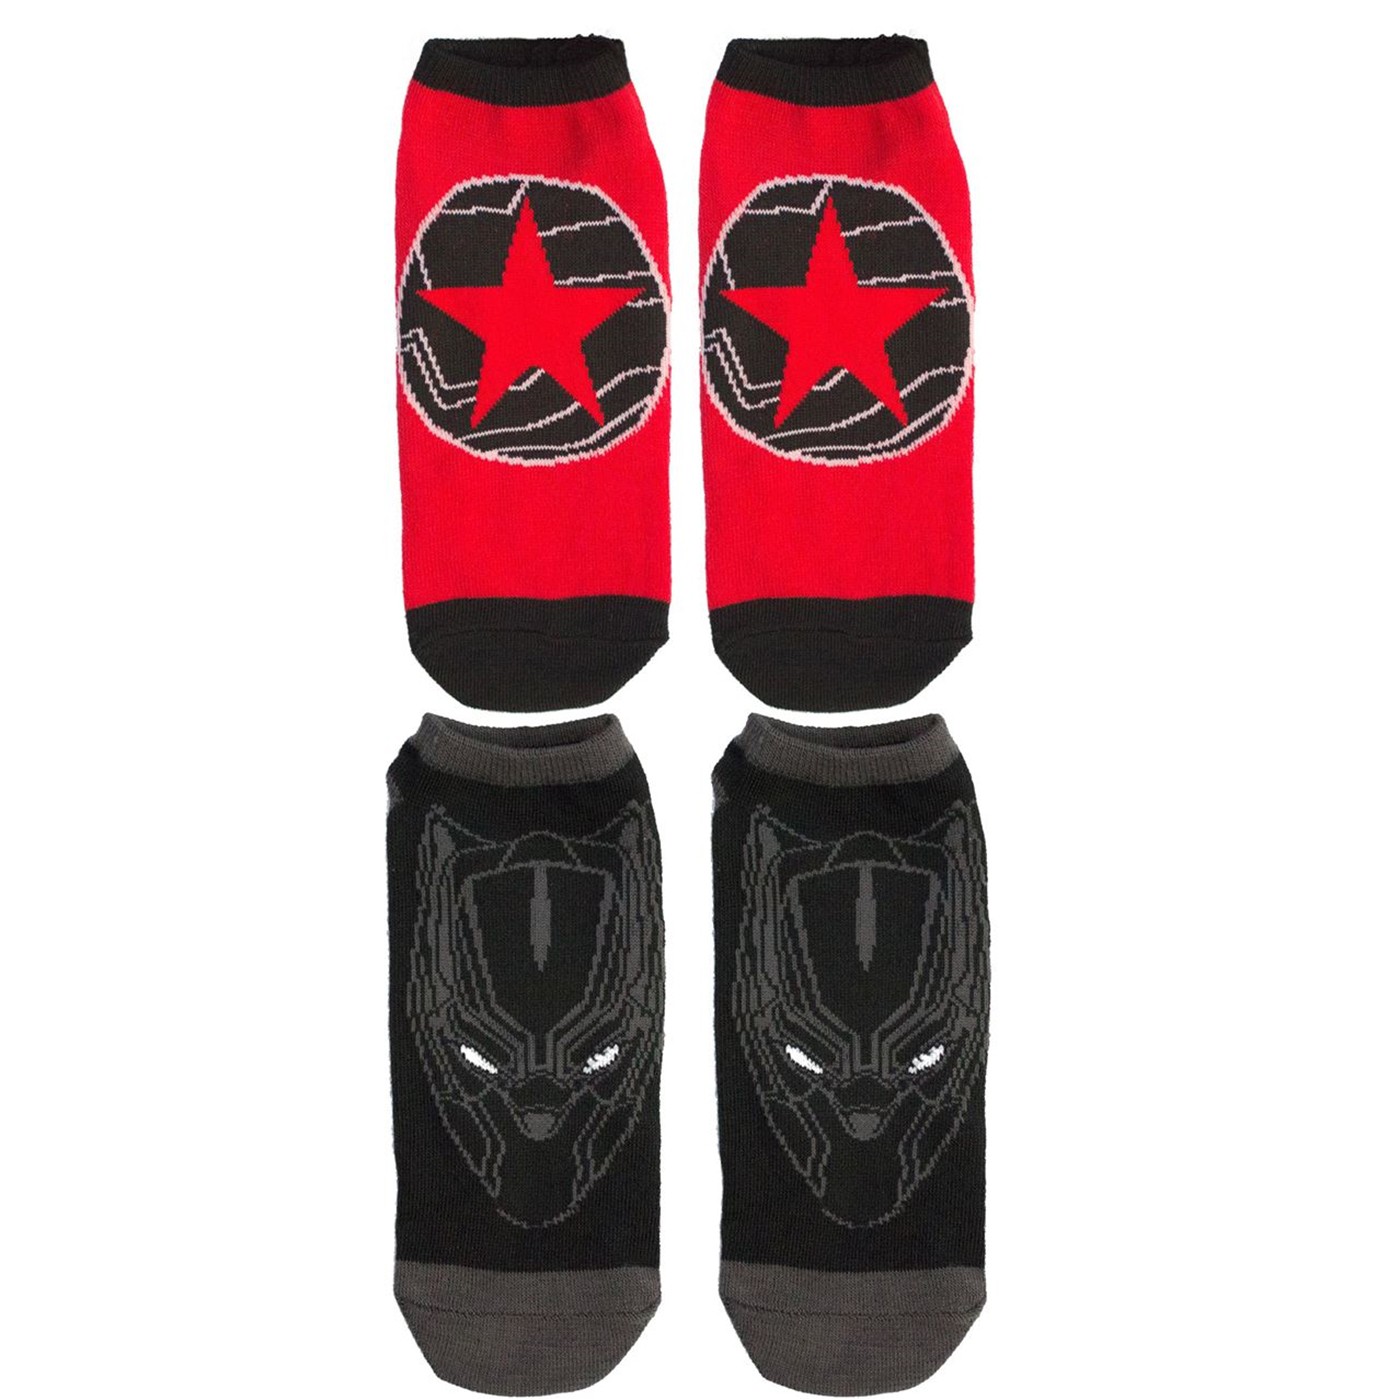 Black Panther and Winter Soldier 2-pack Women's Ankle socks